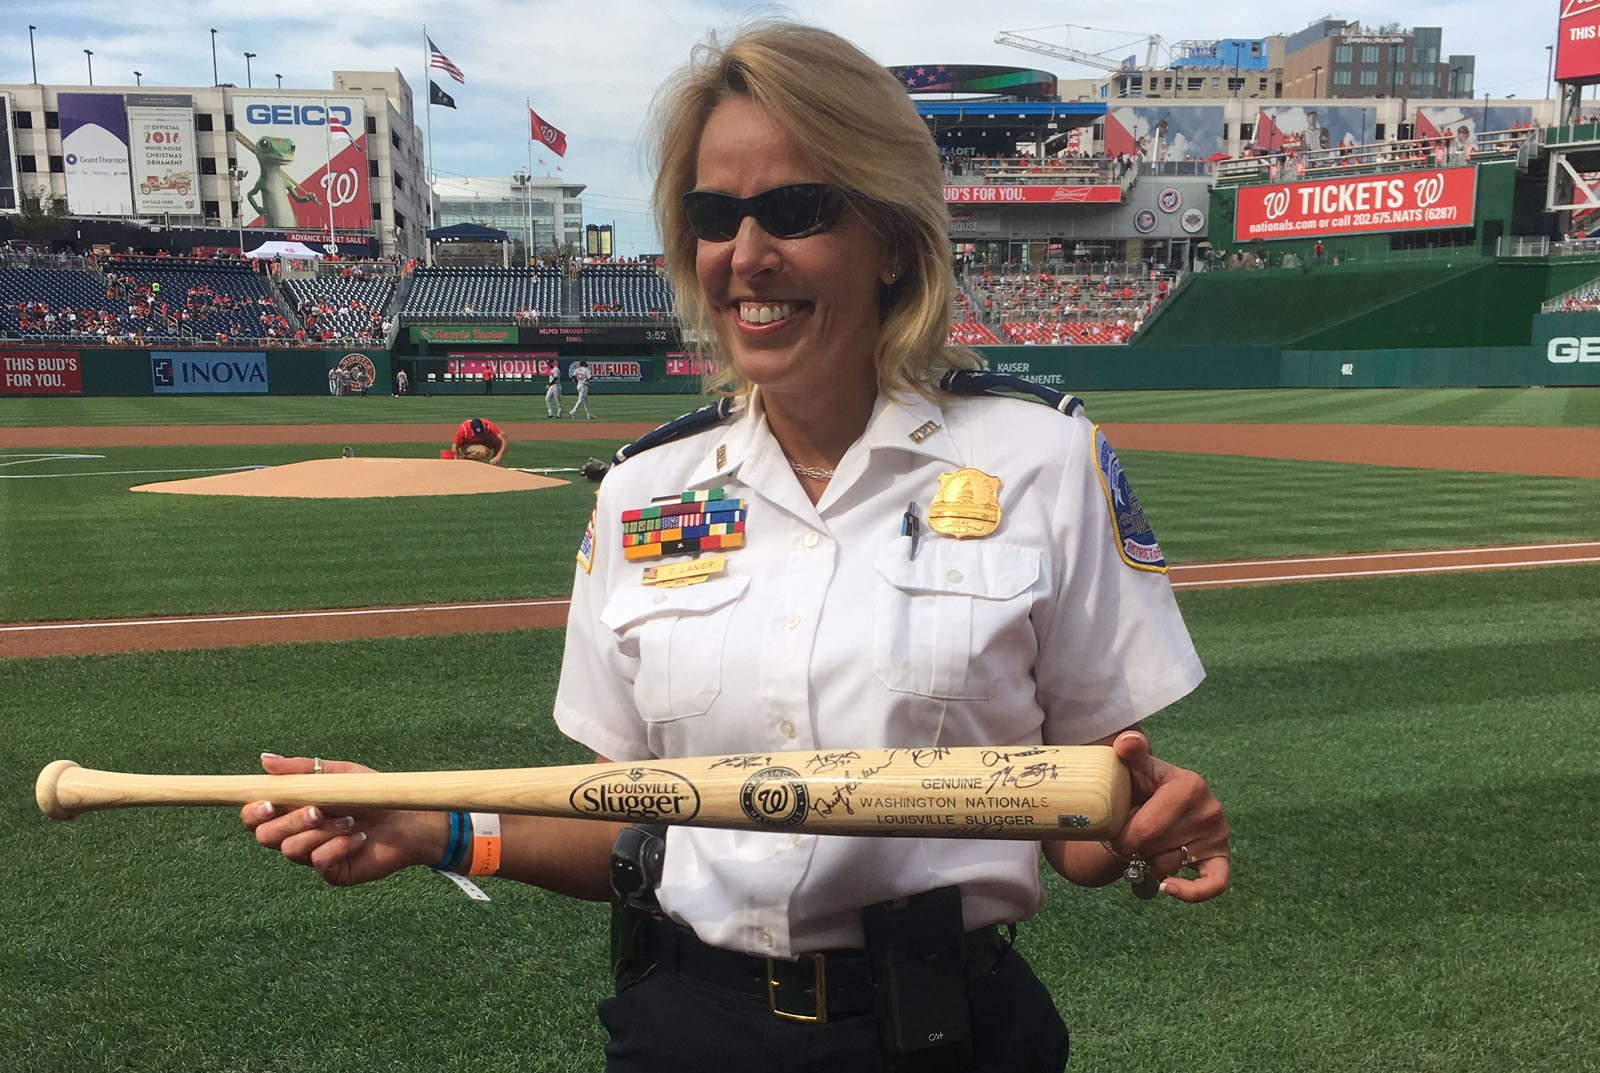 Departing D.C. police Chief Cathy Lanier received a bat signed by all the players of the team before handing off the game ball to Nationals' pitcher Max Scherzer. (WTOP/Mike Murillo)